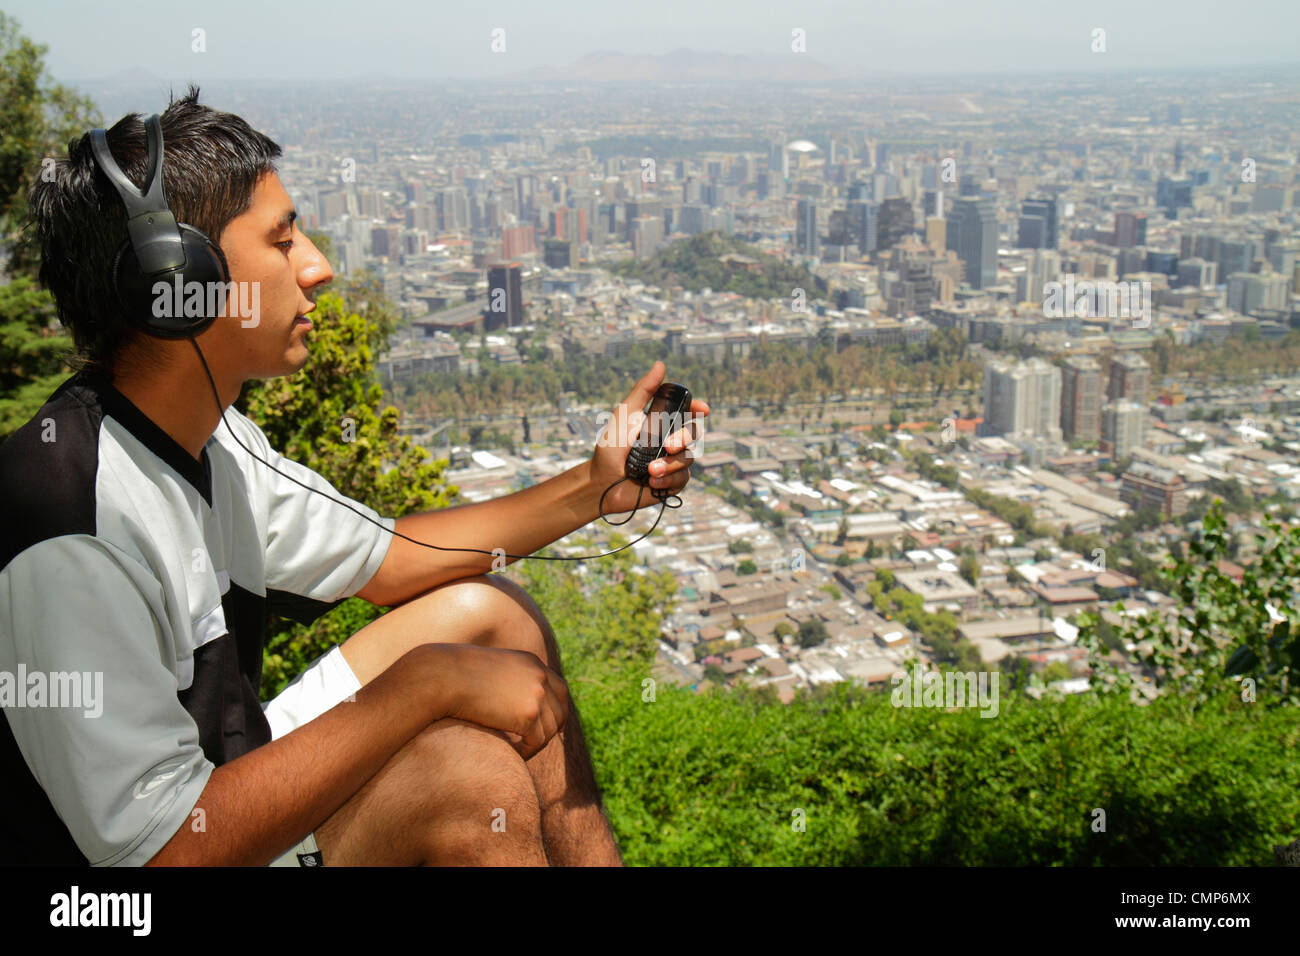 Santiago Chile,Cerro San Cristobal,Estacion Funicular,Bellavista,downtown,view from,aerial overhead view from above,scenic overlook,city skyline citys Stock Photo